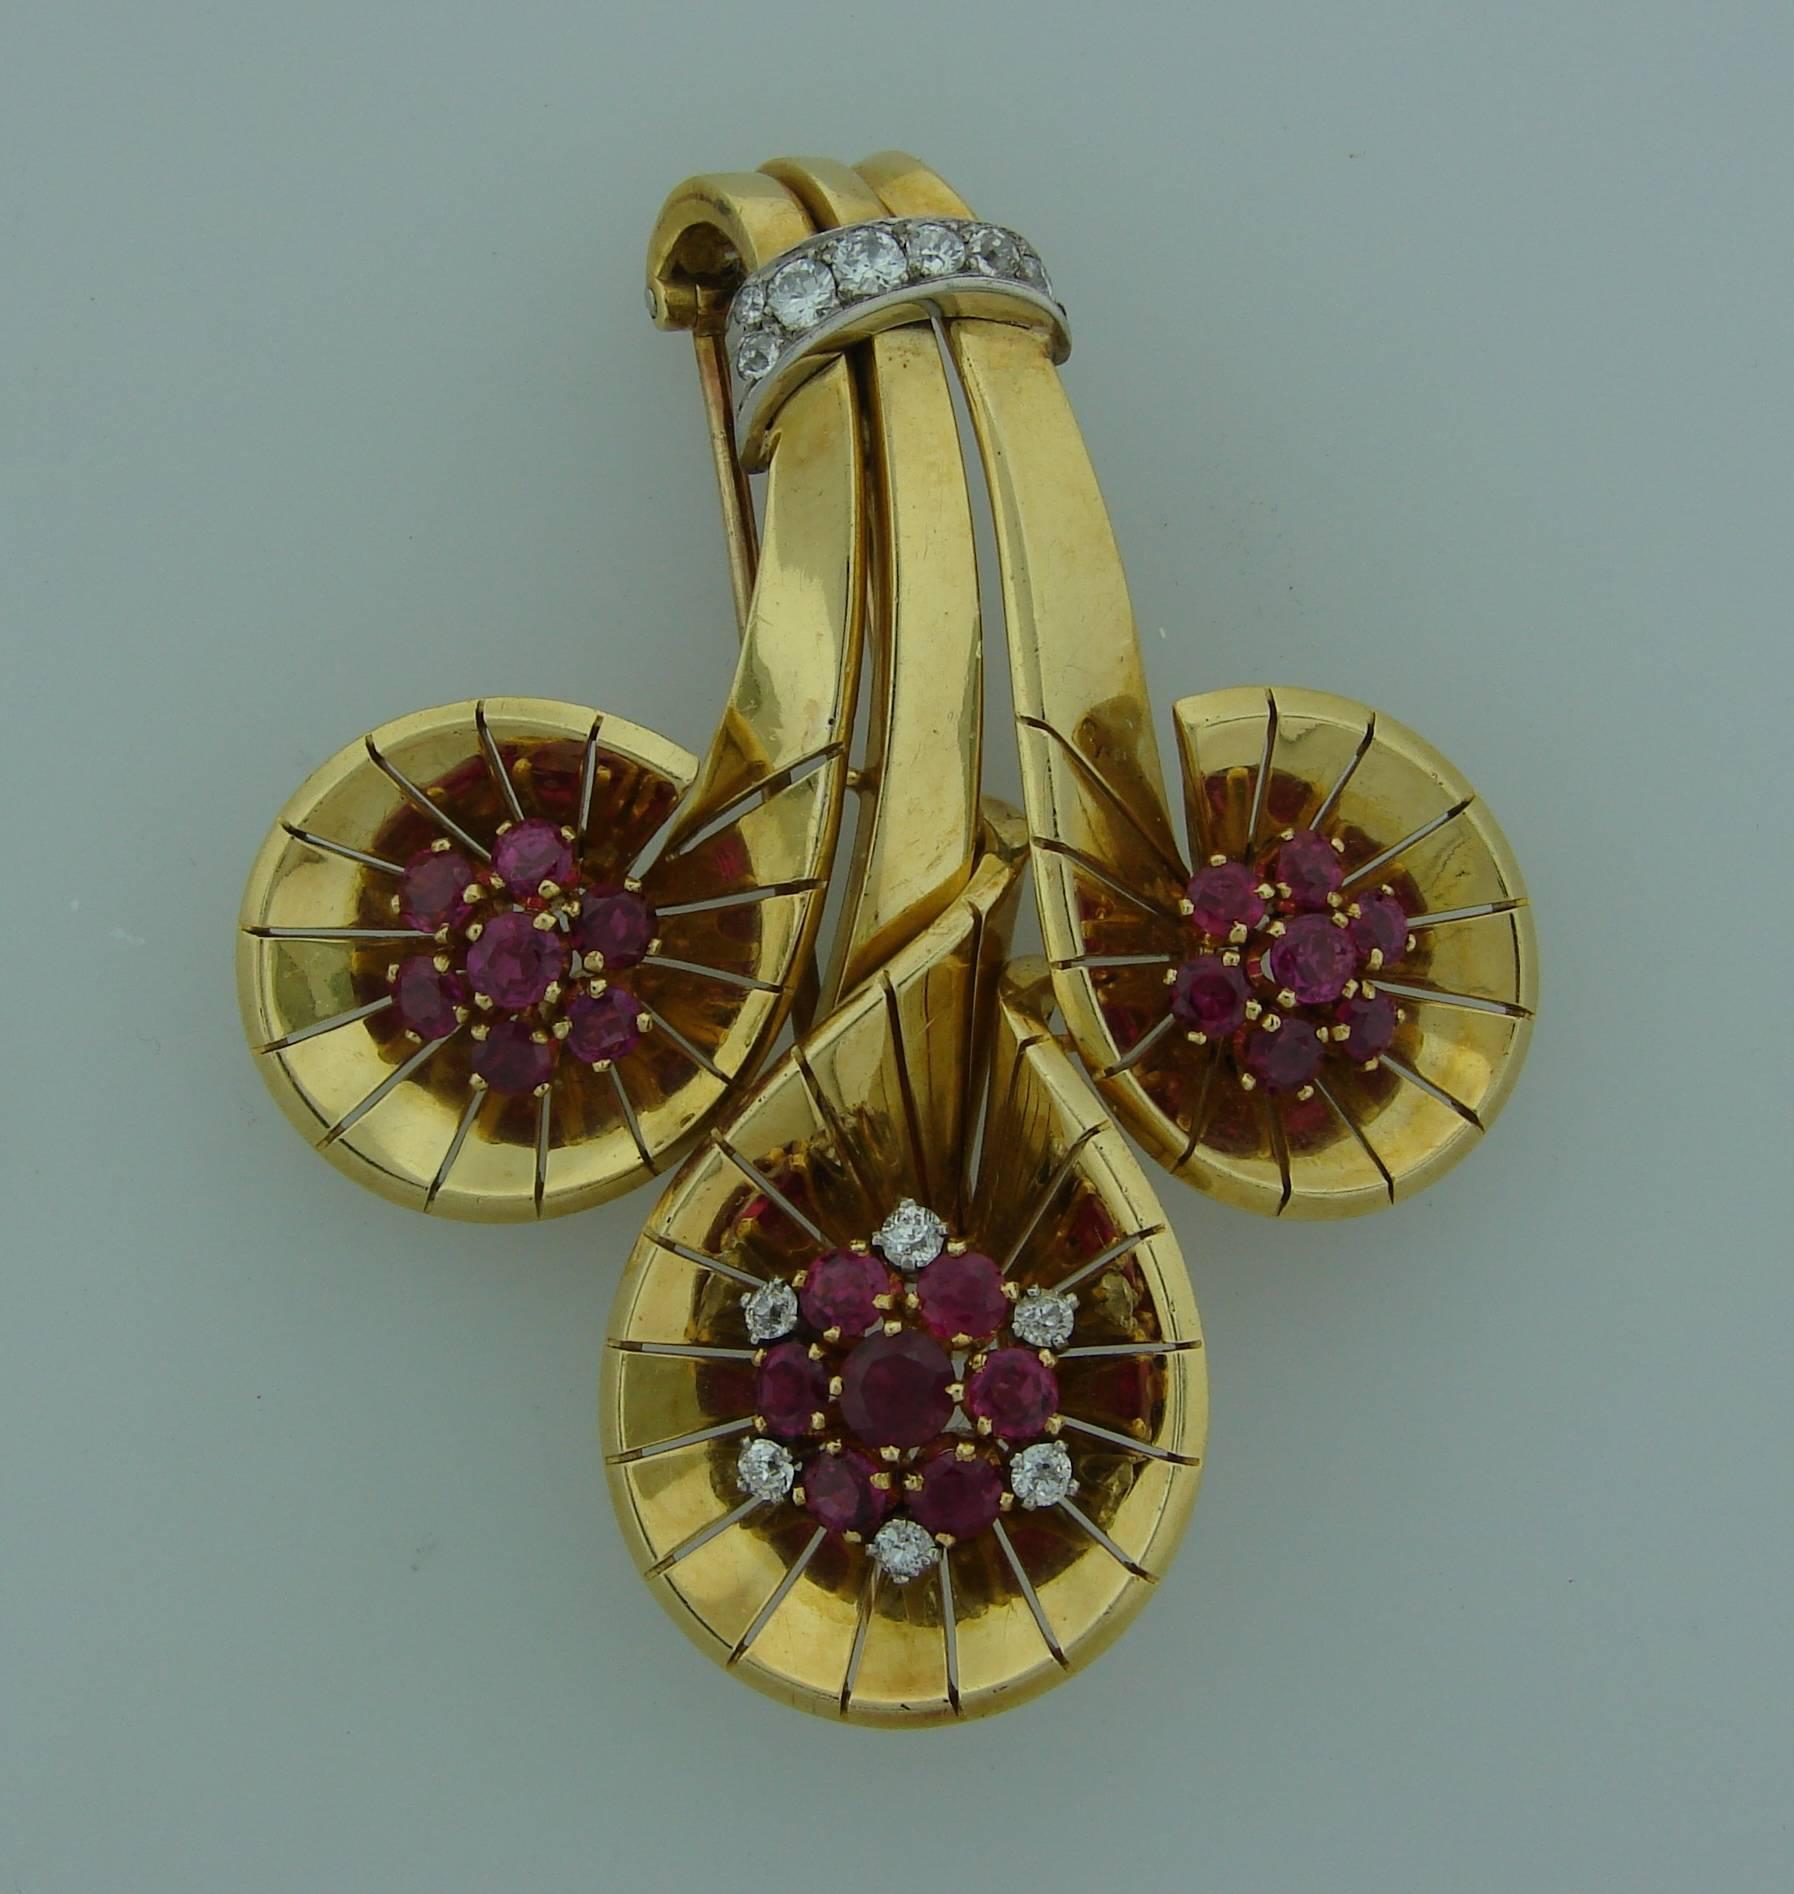 Chic and timeless clip created by Cartier in 1942. Definitely a conversational piece that would make a great addition to your jewelry collection.
The clip is made of 18 karat (stamped) yellow gold and encrusted with rubies and diamonds. The rubies